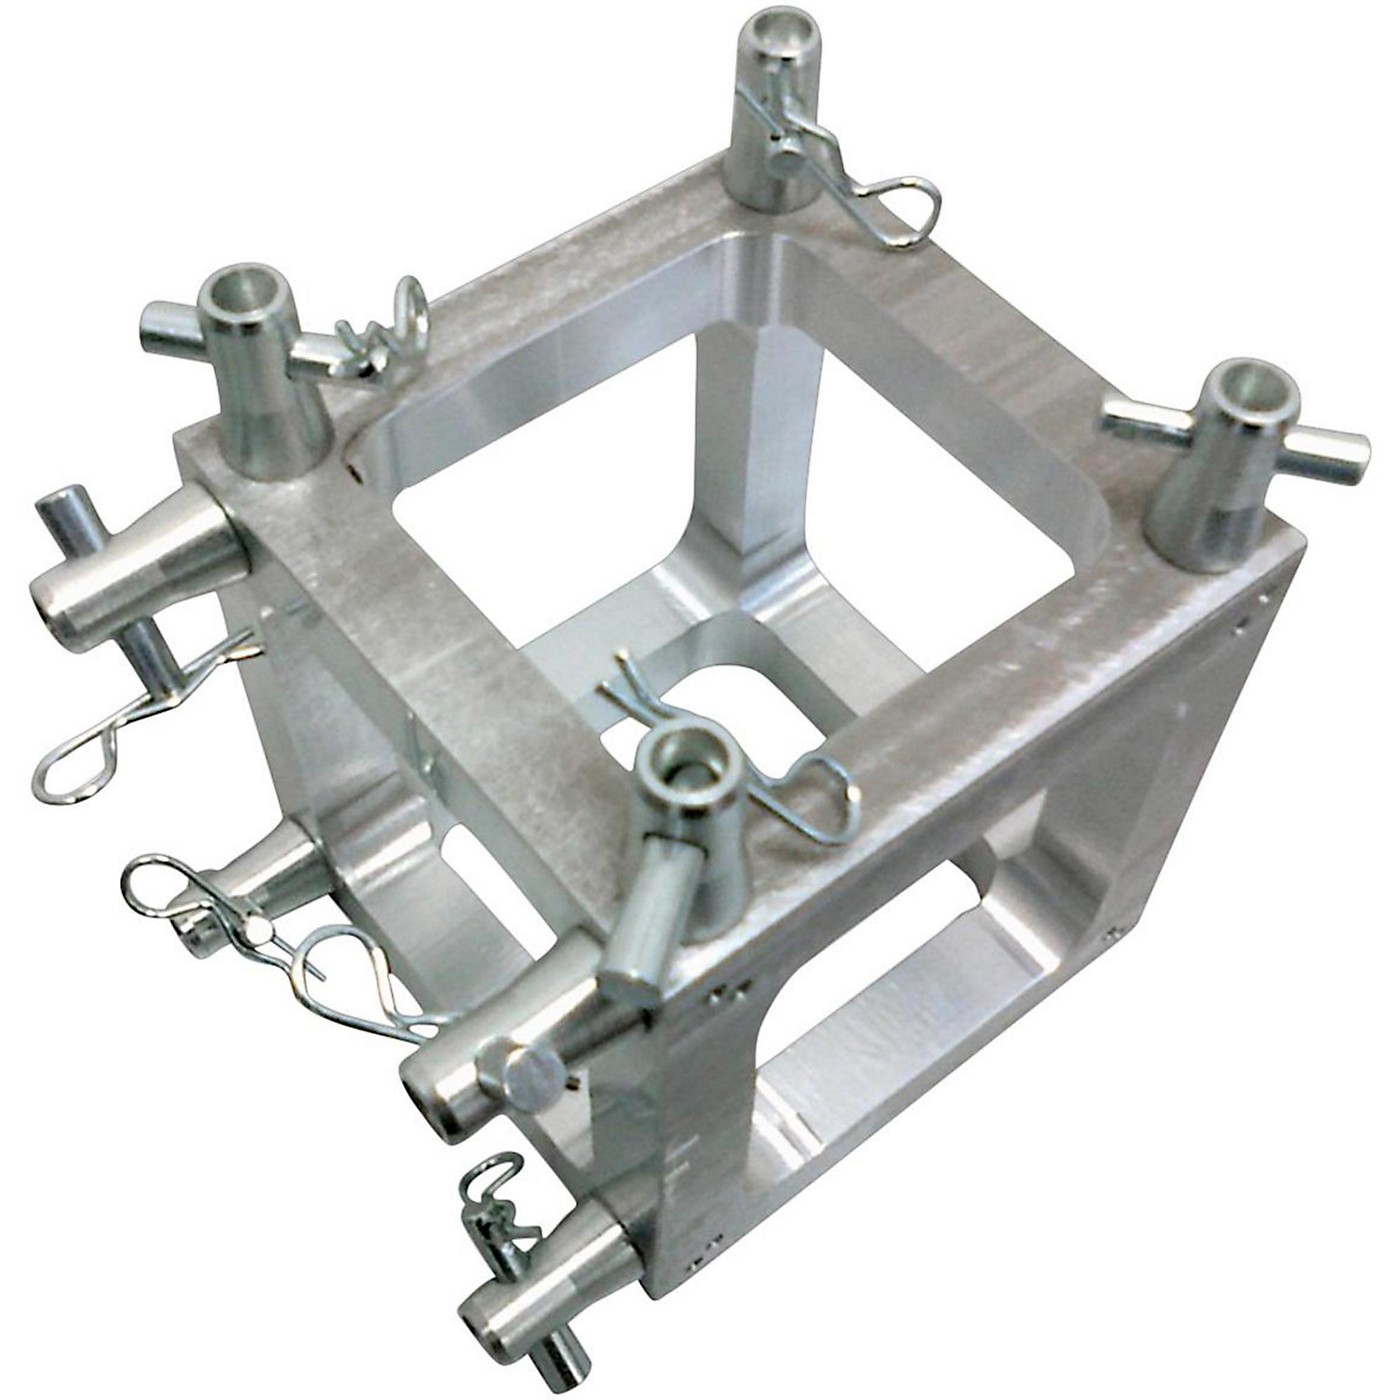 GLOBAL TRUSS STUJBF14 Universal Junction Block Configuration From 2-Way Up to 6-Way thumbnail